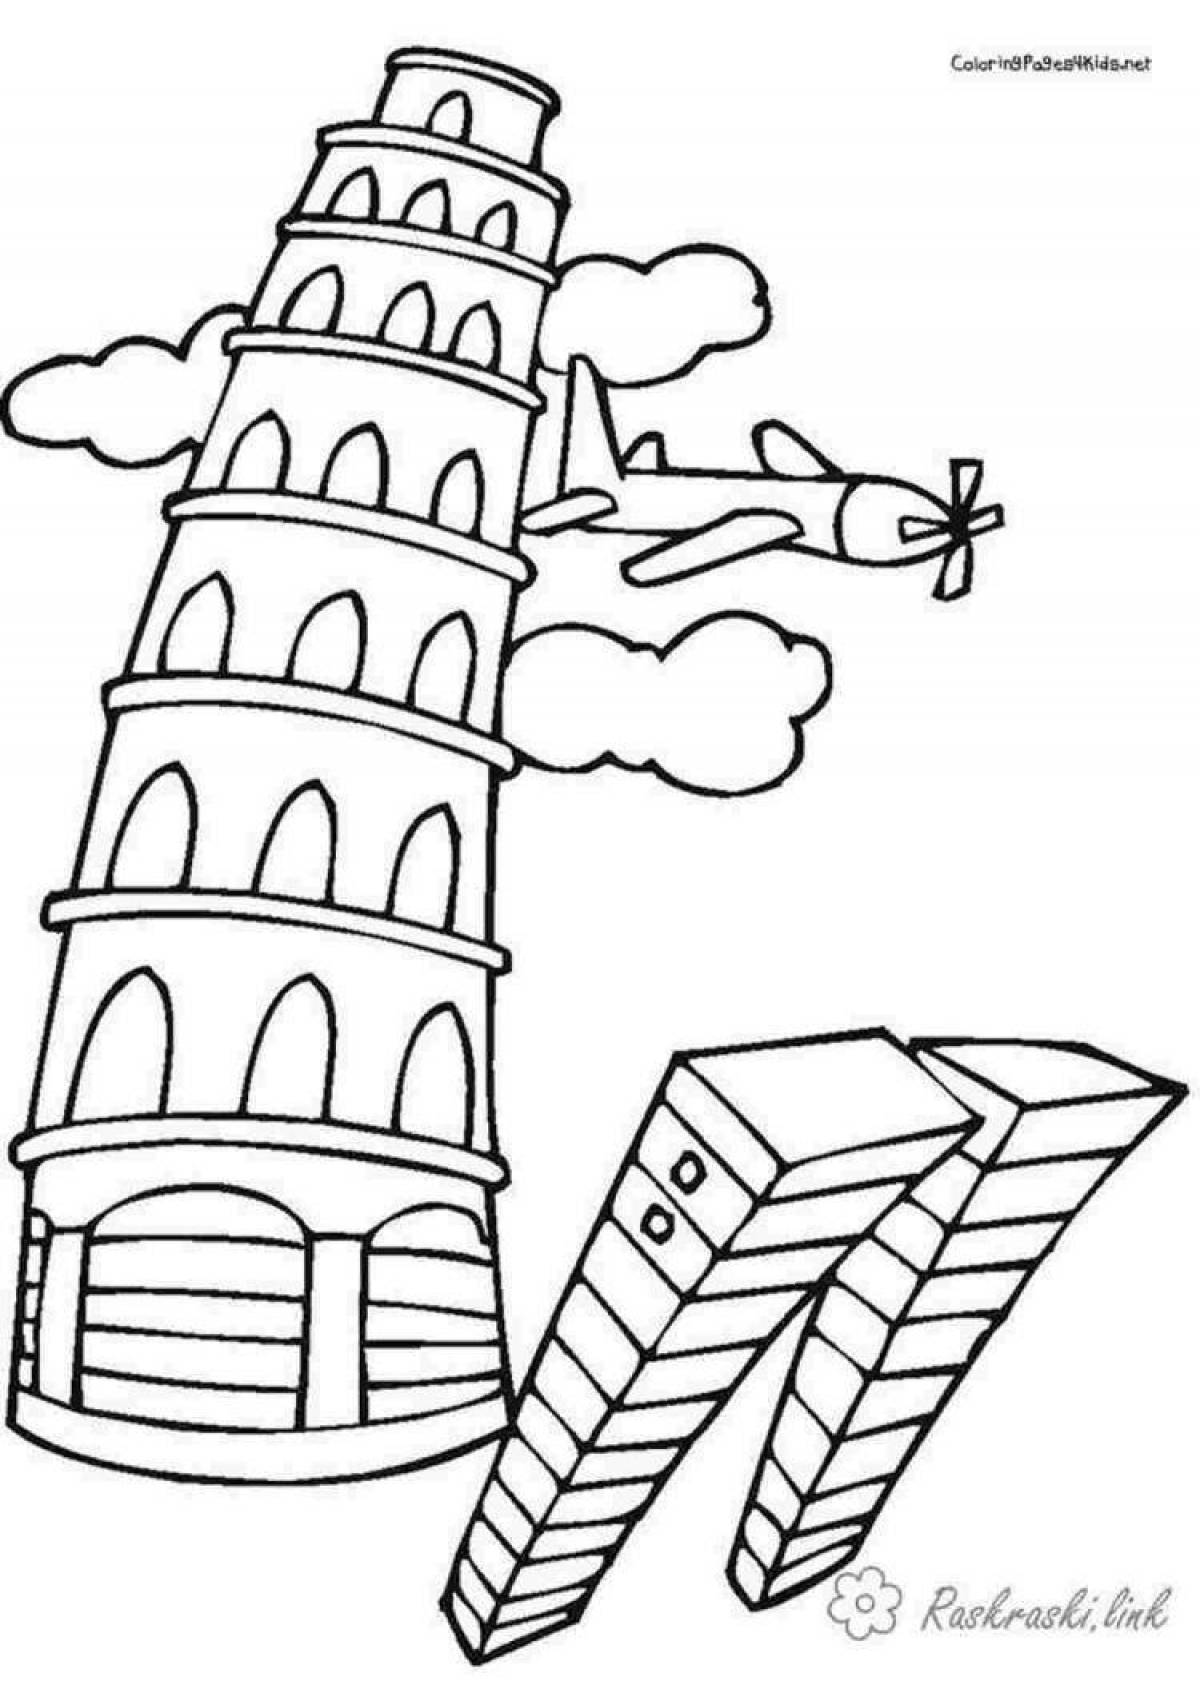 Colorful tower coloring page for kids